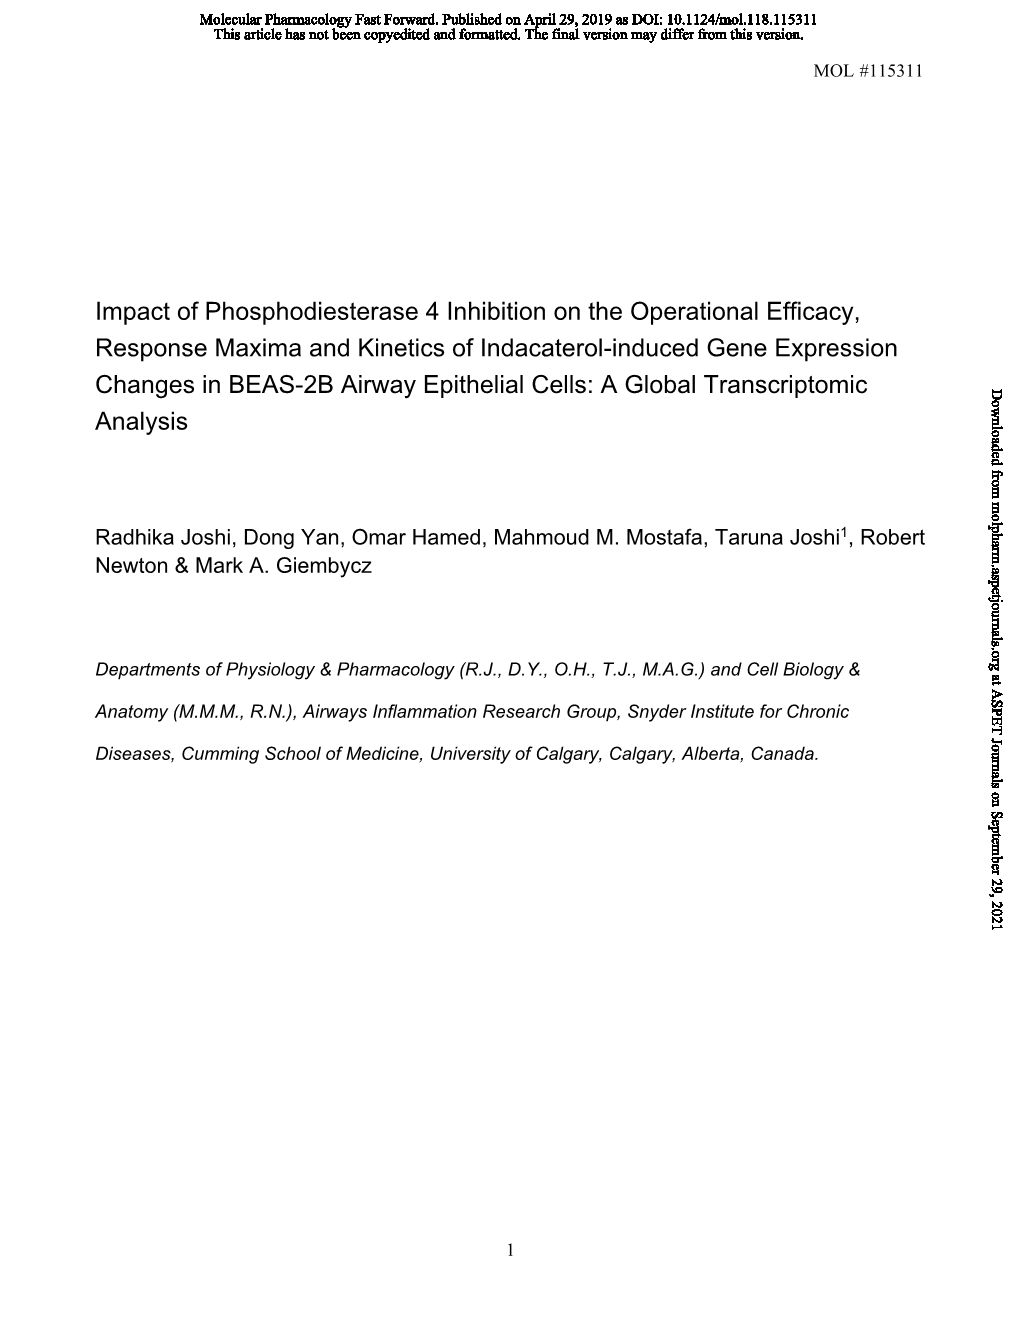 Impact of Phosphodiesterase 4 Inhibition on the Operational Efficacy, Response Maxima and Kinetics of Indacaterol-Induced Gene Expression